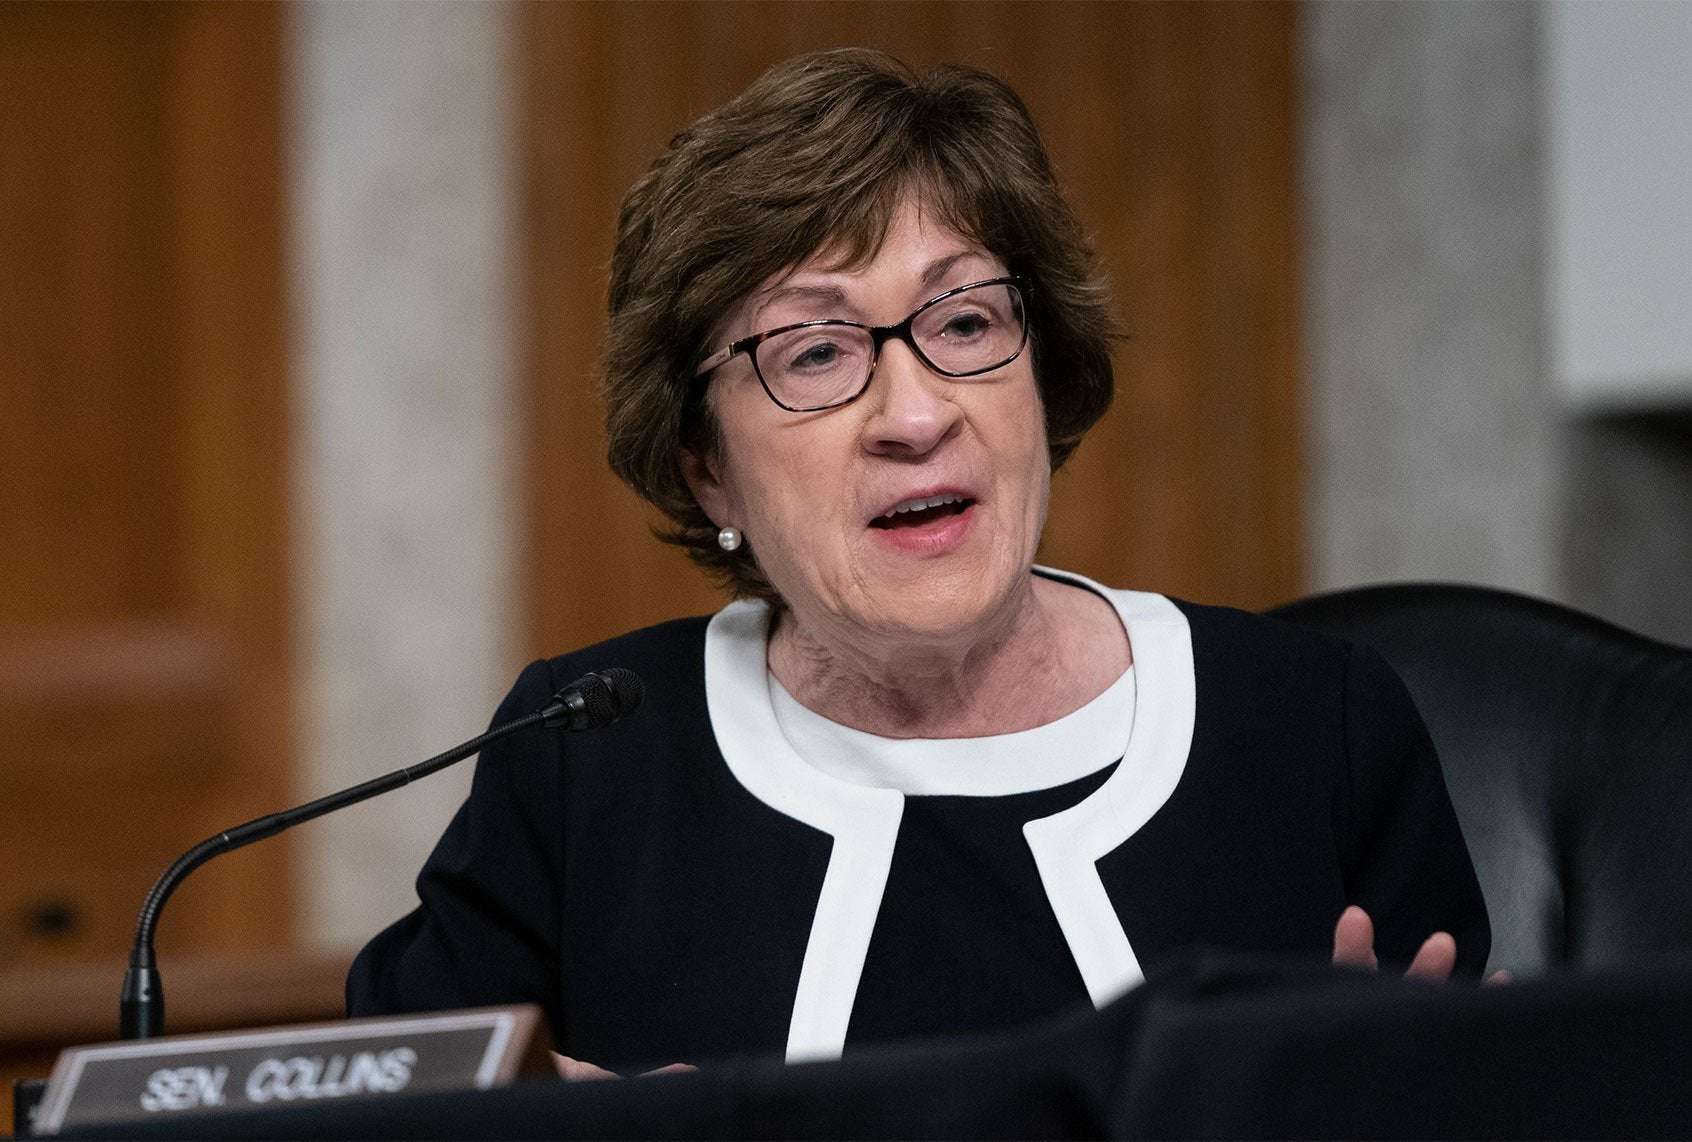 image for Susan Collins wrote legislation that made millions for her husband's lobbying firm